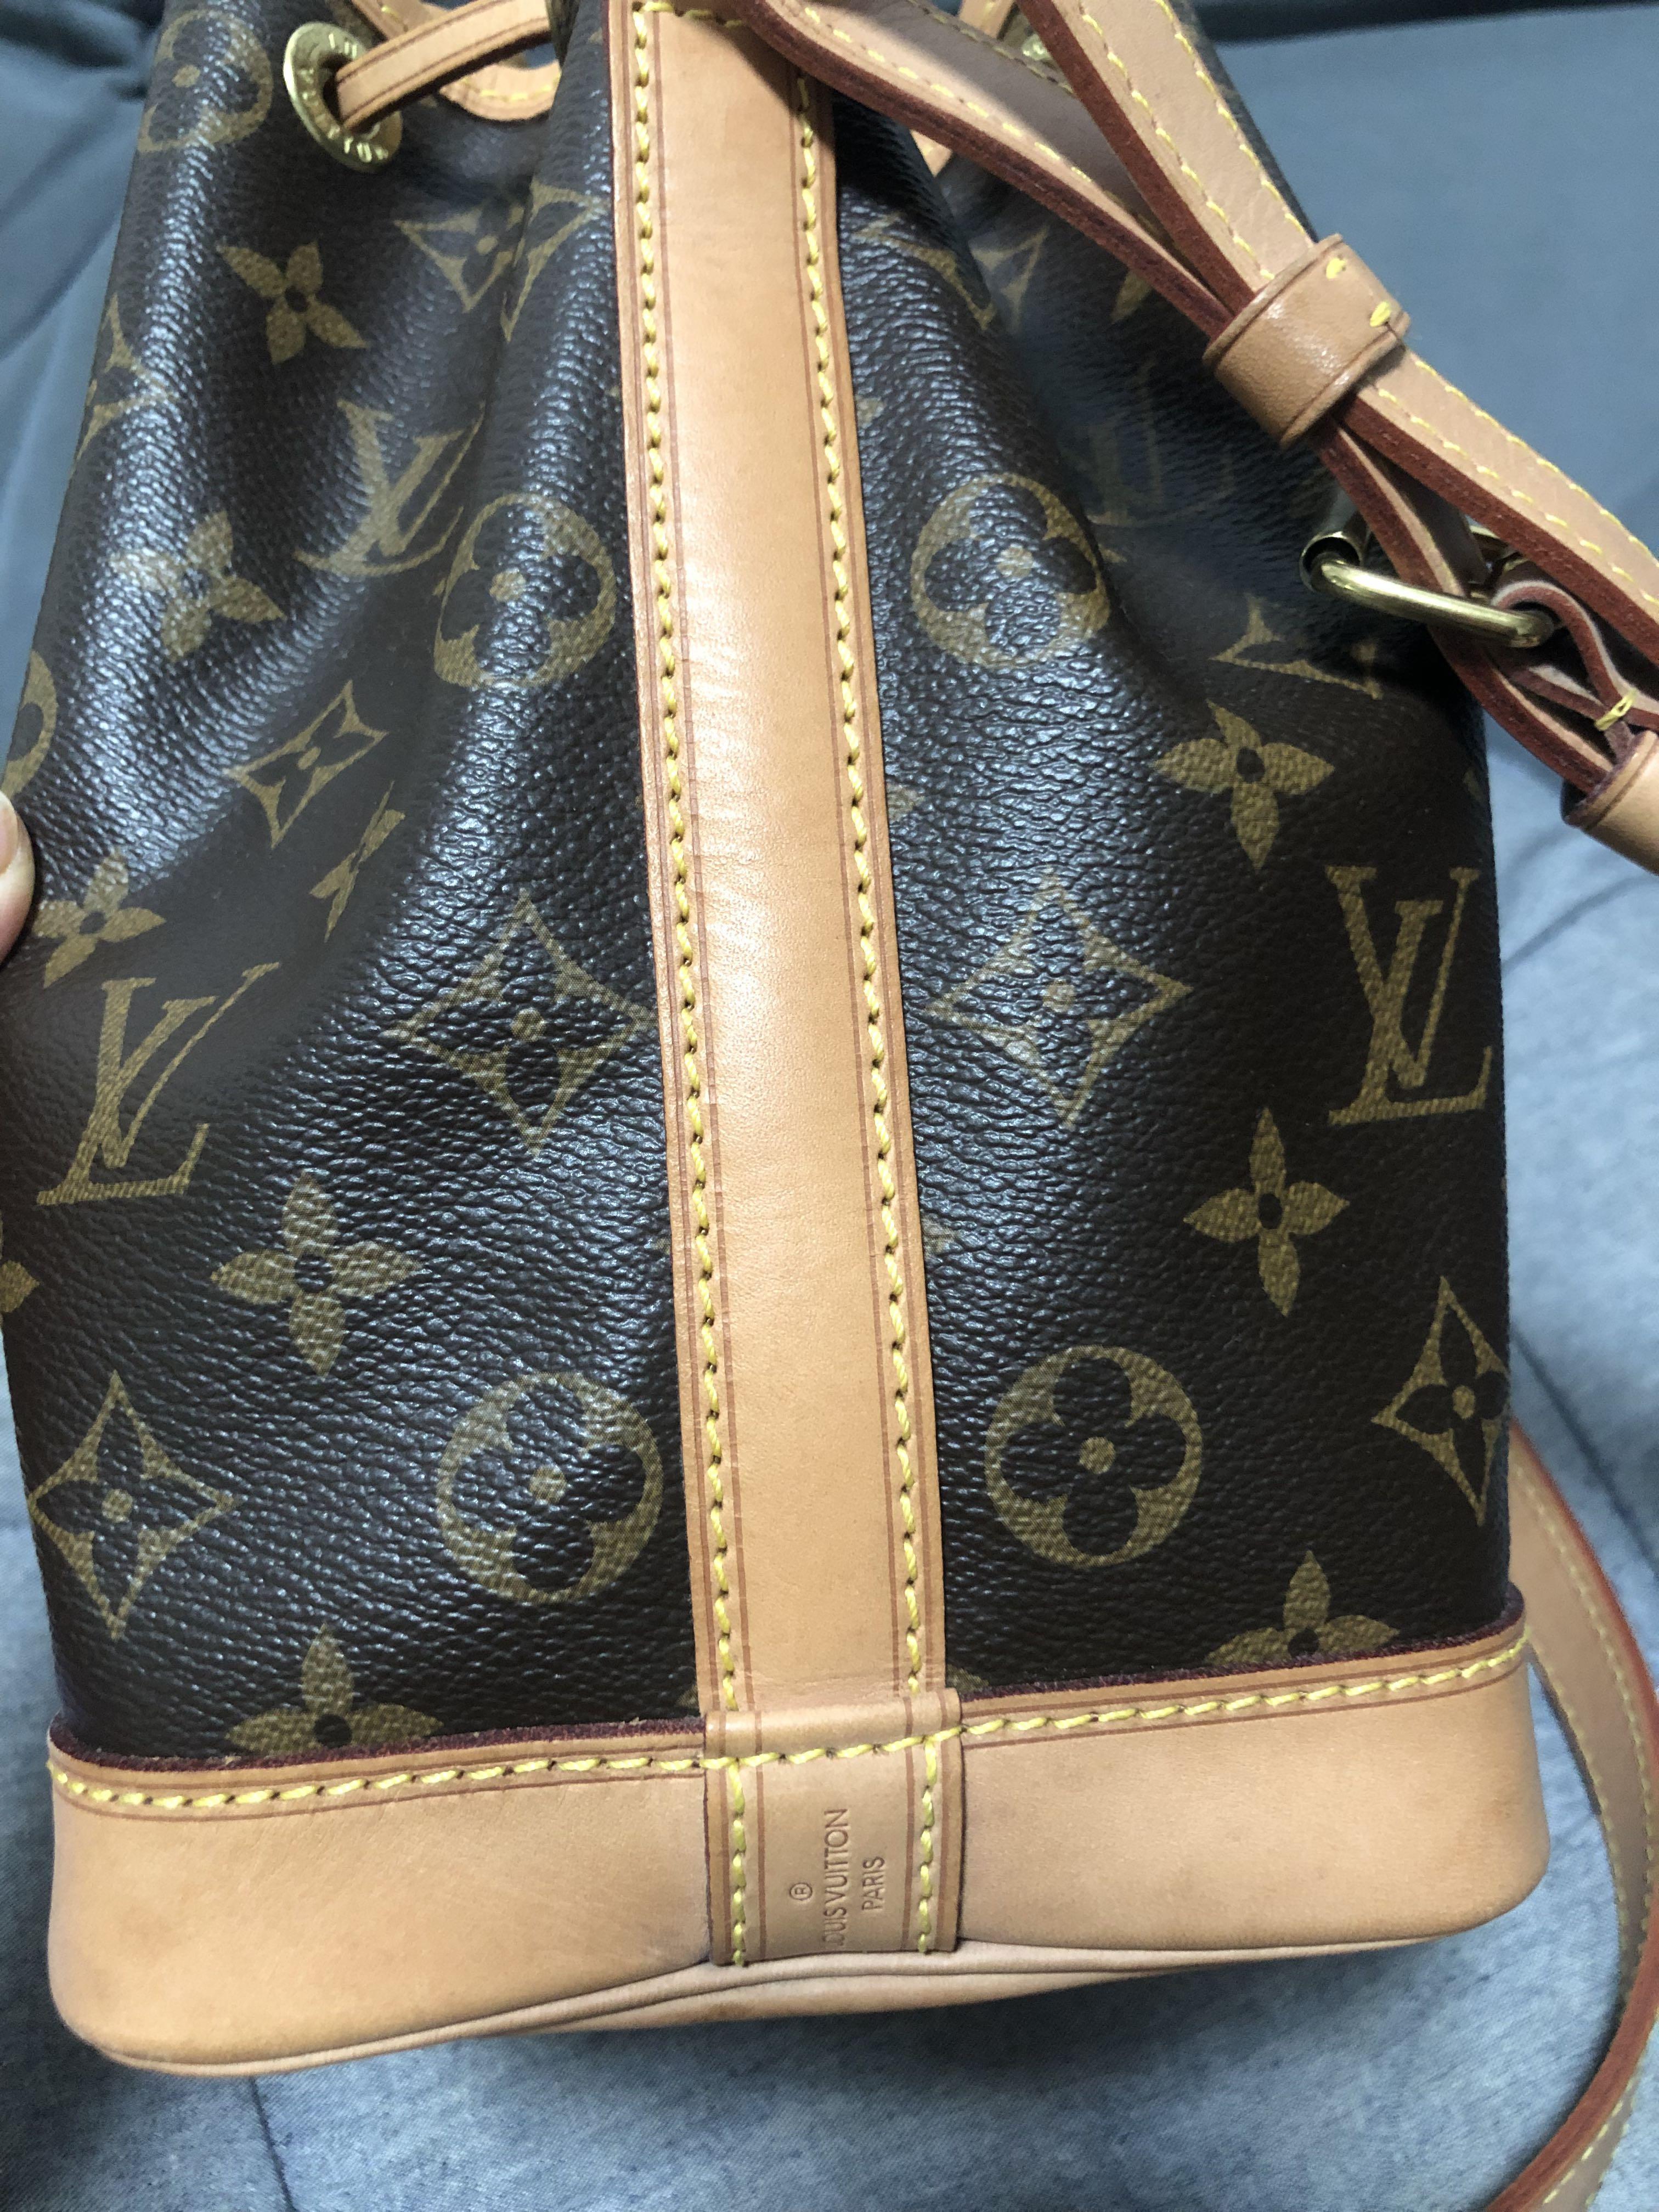 Louis Vuitton Noe BB Monogram M40817 New with tags box and dustbag